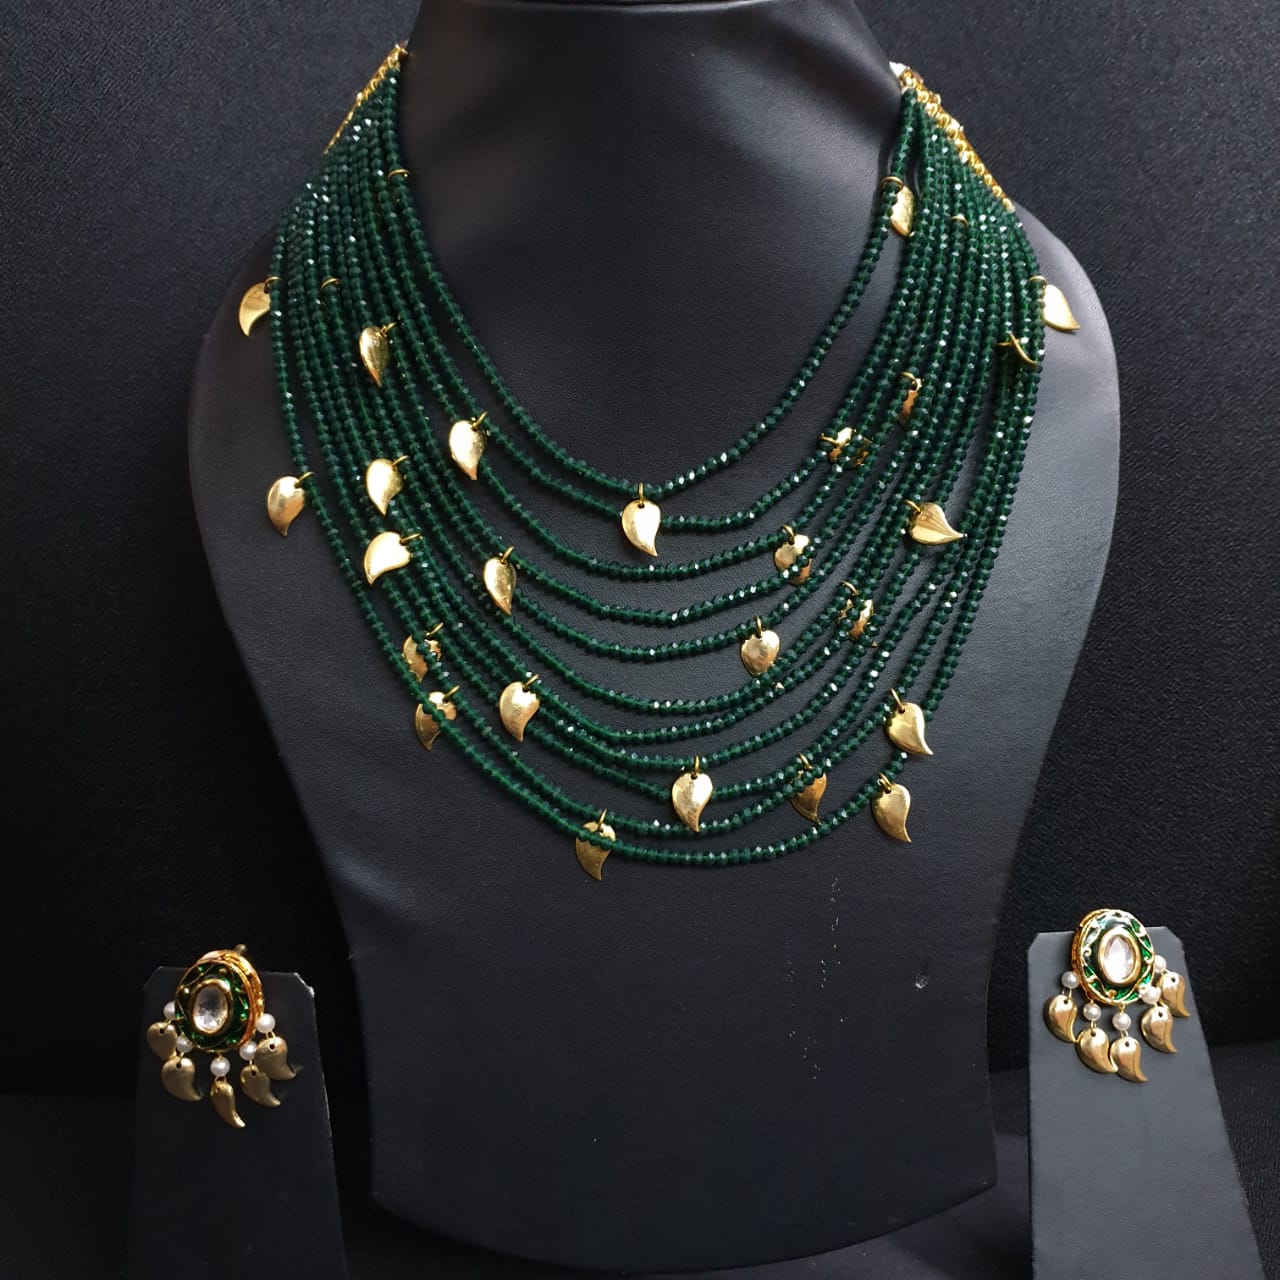 Green Beaded Golden Petals Necklace With Earrings